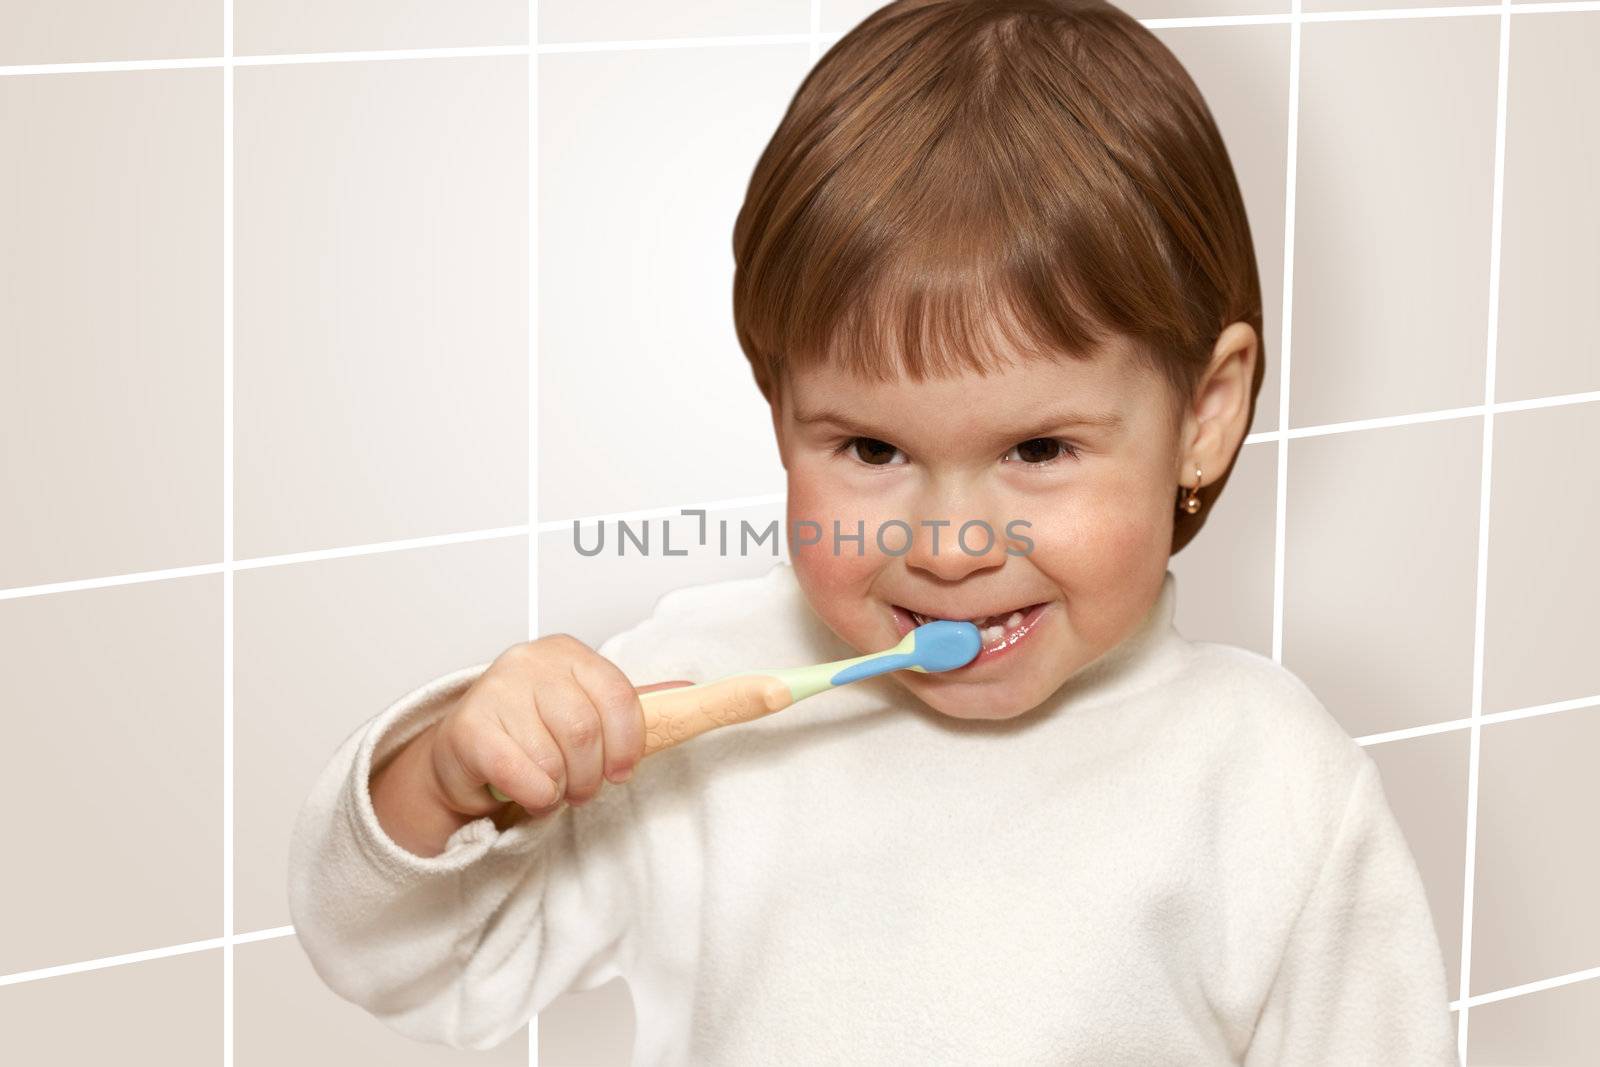 The small girl cleans teeth in a light bathroom